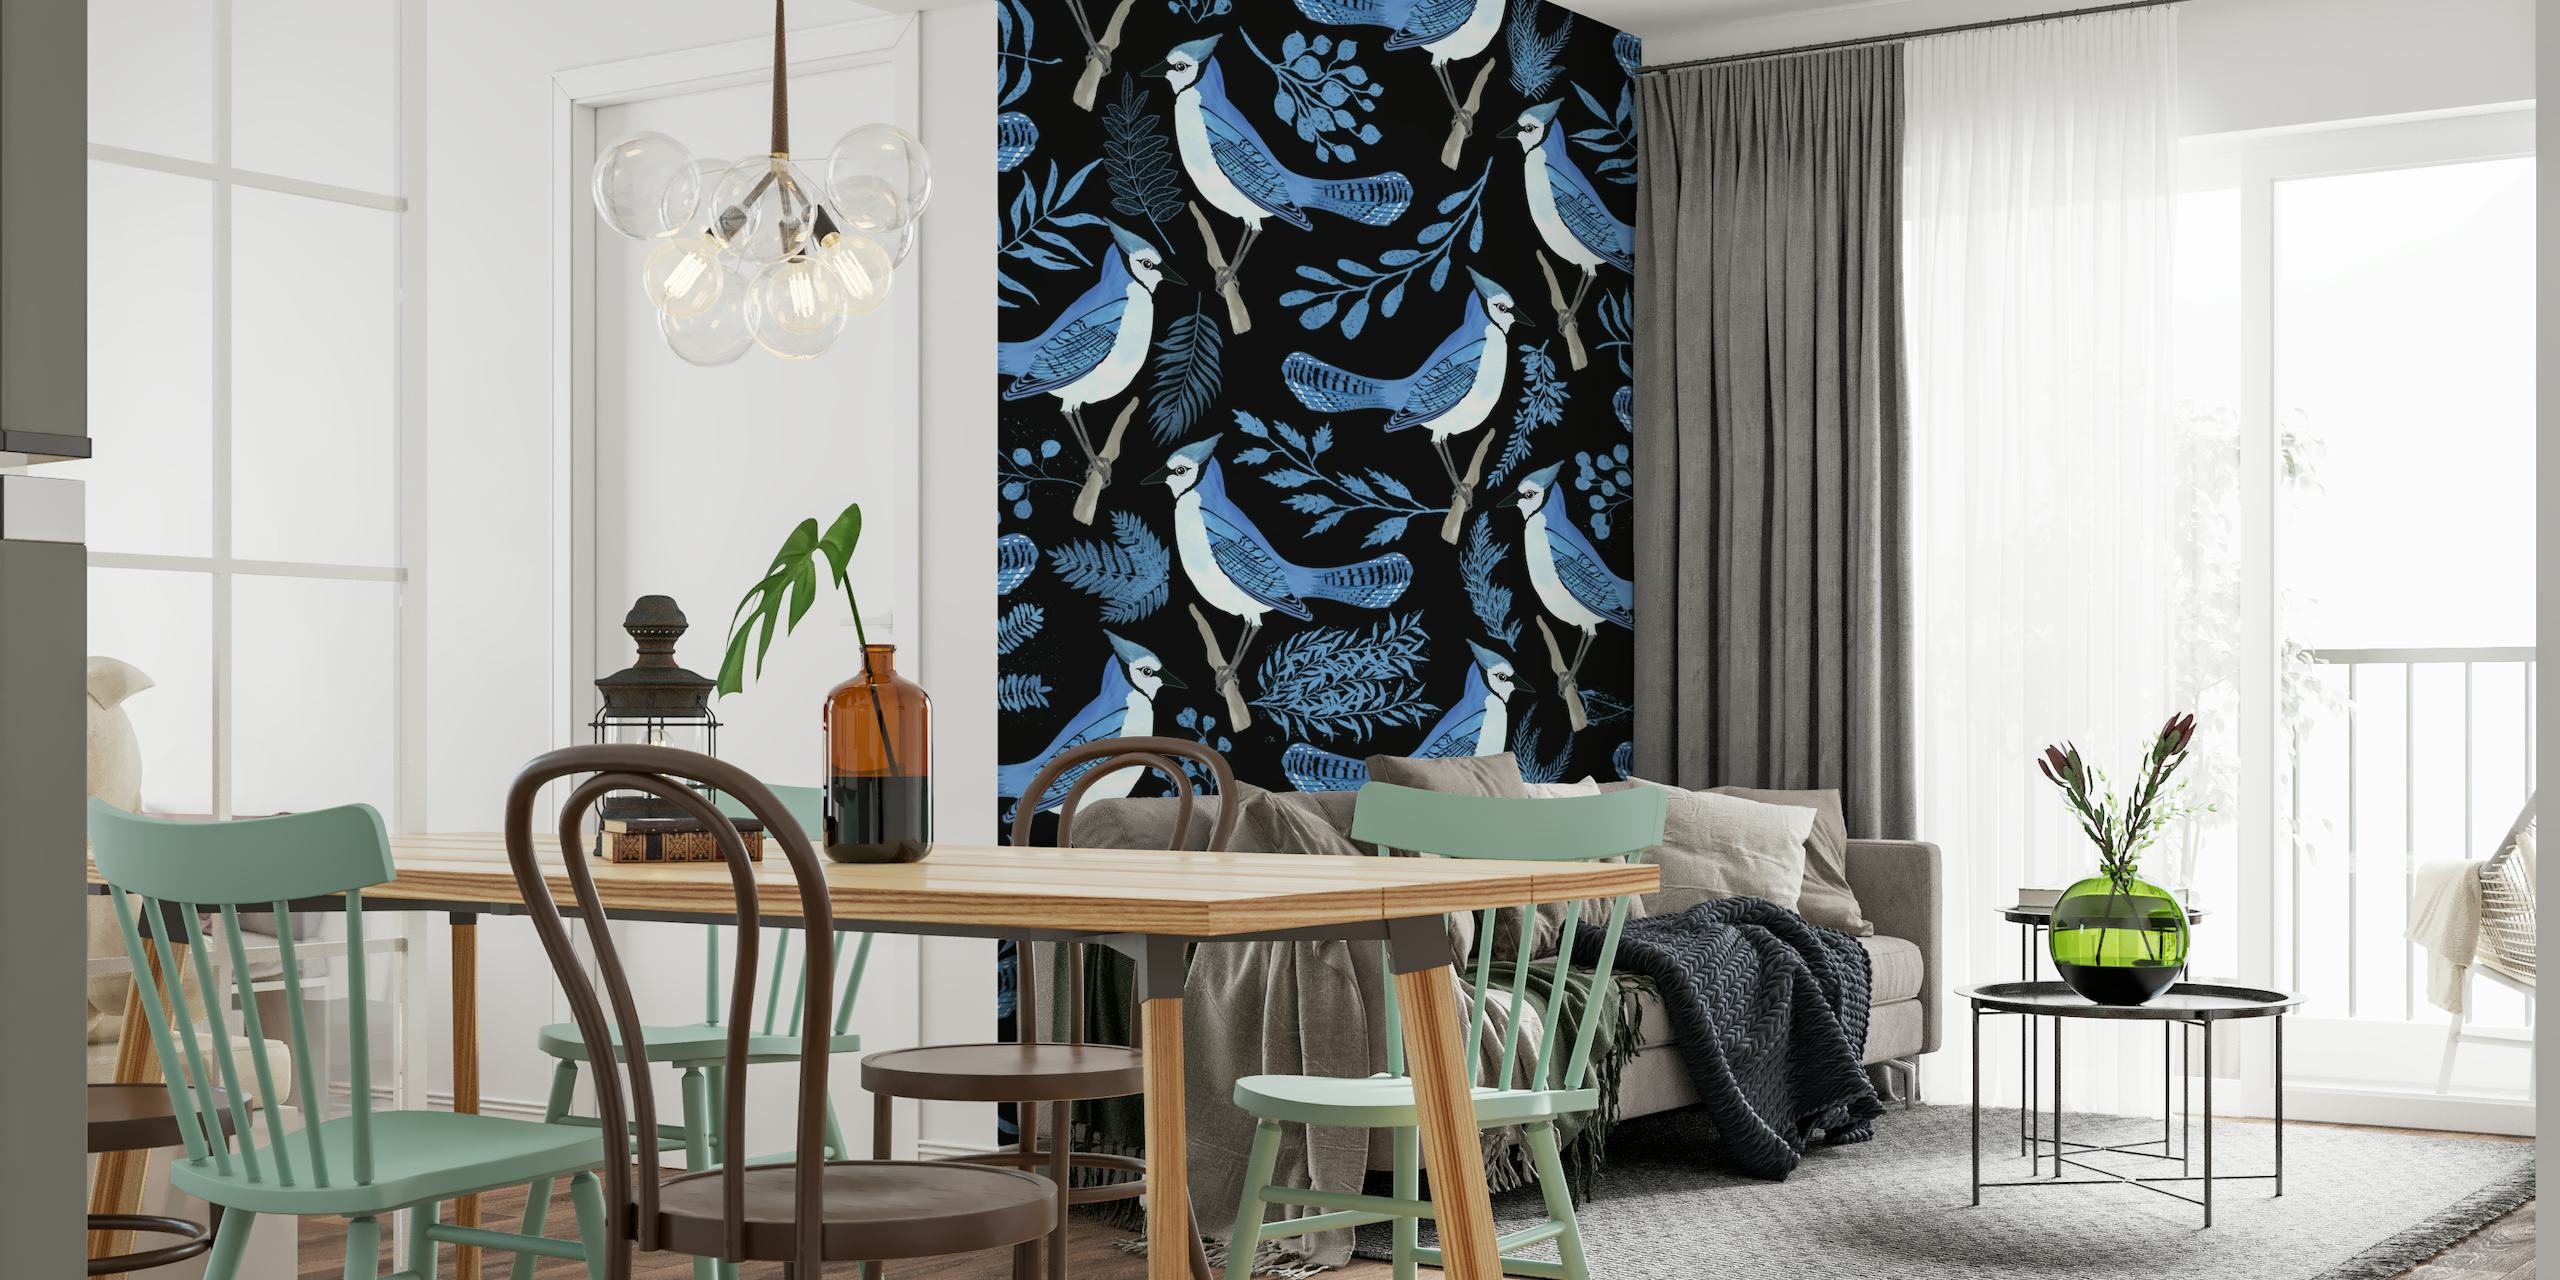 A sophisticated wall mural featuring blue jays and foliage on a black background.